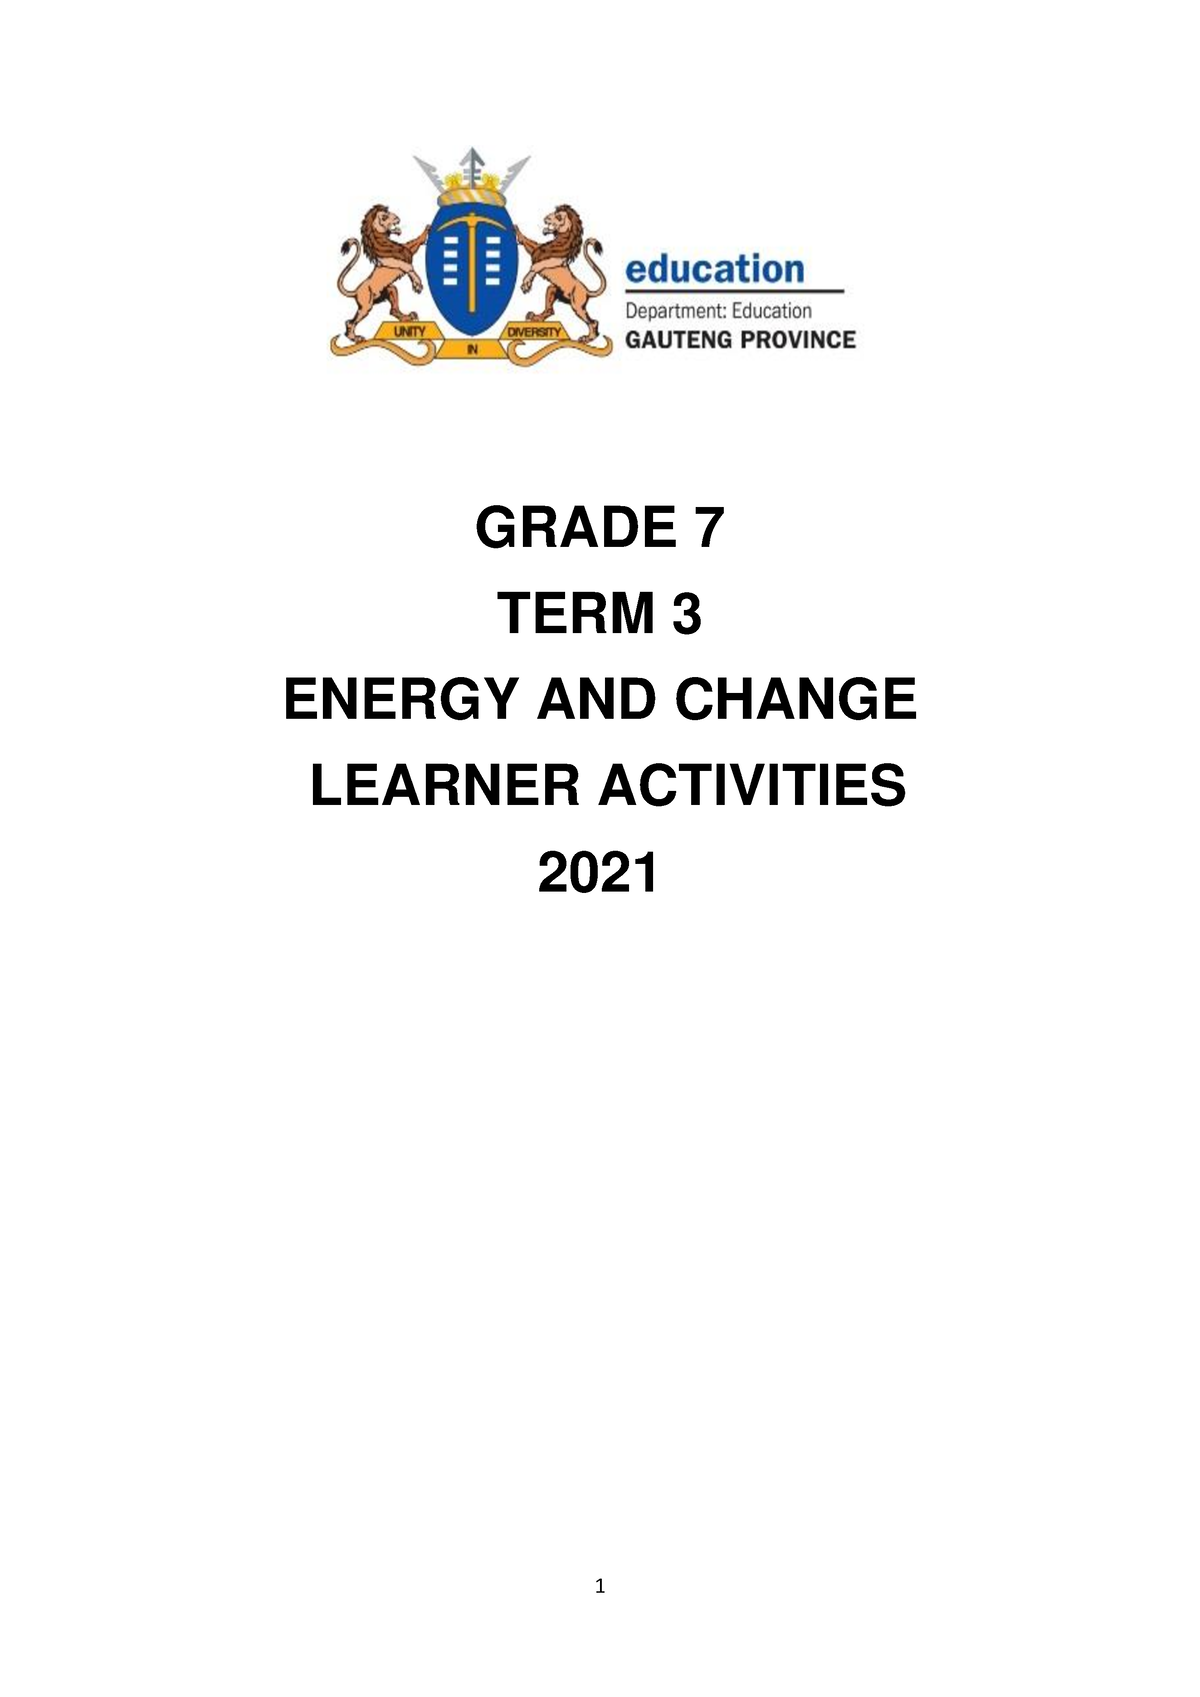 Energy and change Grade 7 GRADE 7 TERM 3 ENERGY AND CHANGE LEARNER